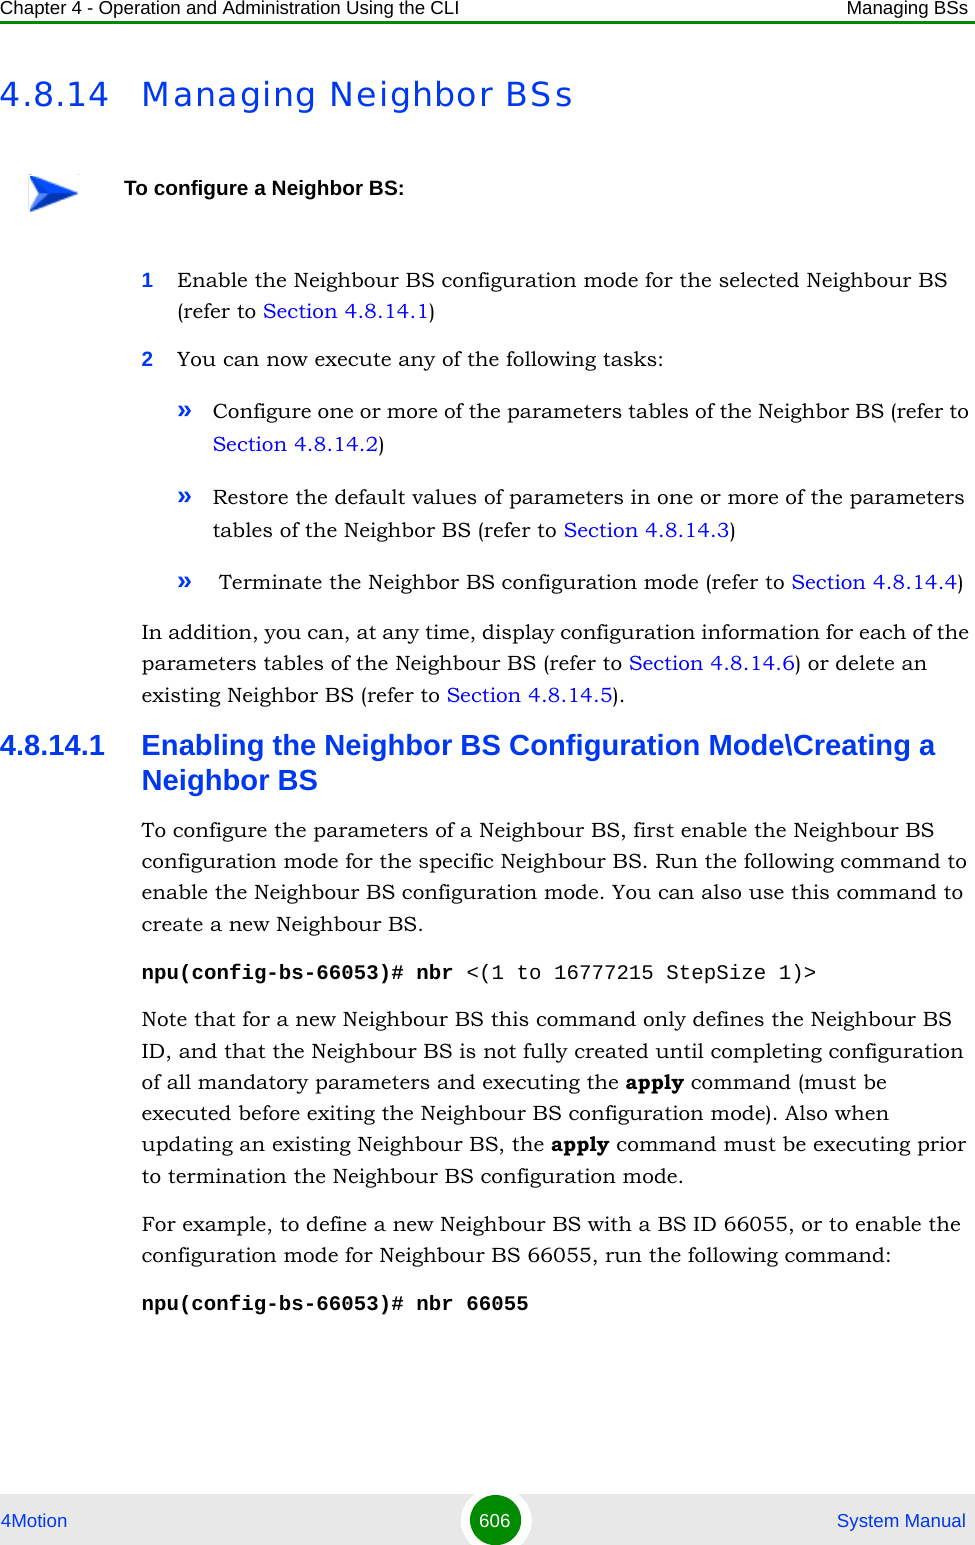 Chapter 4 - Operation and Administration Using the CLI Managing BSs4Motion 606  System Manual4.8.14 Managing Neighbor BSs1Enable the Neighbour BS configuration mode for the selected Neighbour BS (refer to Section 4.8.14.1)2You can now execute any of the following tasks:»Configure one or more of the parameters tables of the Neighbor BS (refer to Section 4.8.14.2)»Restore the default values of parameters in one or more of the parameters tables of the Neighbor BS (refer to Section 4.8.14.3)» Terminate the Neighbor BS configuration mode (refer to Section 4.8.14.4)In addition, you can, at any time, display configuration information for each of the parameters tables of the Neighbour BS (refer to Section 4.8.14.6) or delete an existing Neighbor BS (refer to Section 4.8.14.5). 4.8.14.1 Enabling the Neighbor BS Configuration Mode\Creating a Neighbor BSTo configure the parameters of a Neighbour BS, first enable the Neighbour BS configuration mode for the specific Neighbour BS. Run the following command to enable the Neighbour BS configuration mode. You can also use this command to create a new Neighbour BS. npu(config-bs-66053)# nbr &lt;(1 to 16777215 StepSize 1)&gt;Note that for a new Neighbour BS this command only defines the Neighbour BS ID, and that the Neighbour BS is not fully created until completing configuration of all mandatory parameters and executing the apply command (must be executed before exiting the Neighbour BS configuration mode). Also when updating an existing Neighbour BS, the apply command must be executing prior to termination the Neighbour BS configuration mode.For example, to define a new Neighbour BS with a BS ID 66055, or to enable the configuration mode for Neighbour BS 66055, run the following command:npu(config-bs-66053)# nbr 66055To configure a Neighbor BS: